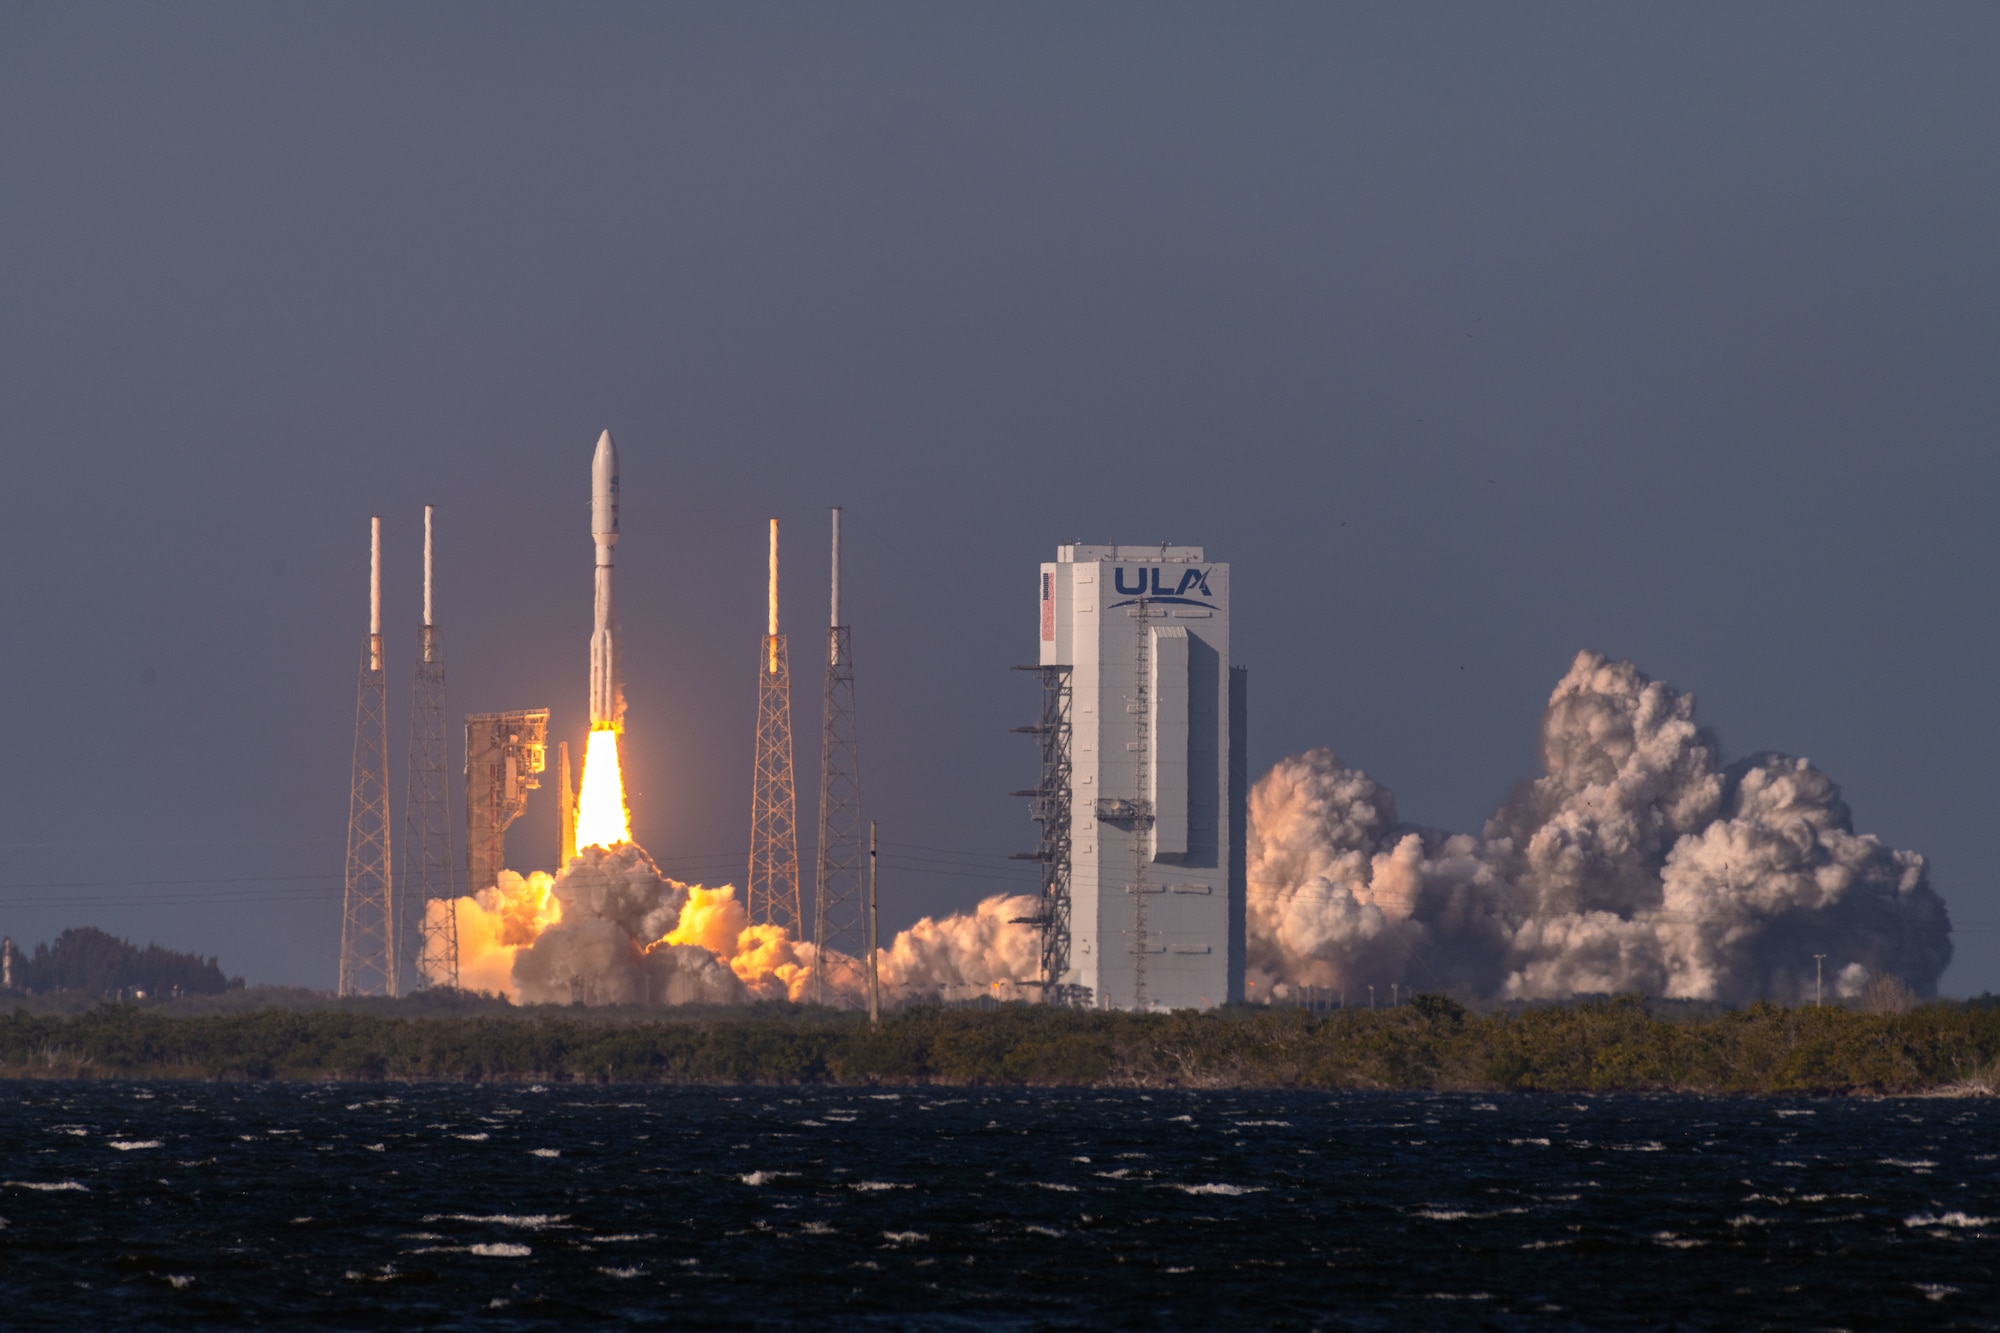 A United Launch Alliance Atlas V rocket launches from Space Launch Complex 41 at Cape Canaveral Space Force Station, Fla., March 1, 2022. This mission carried the National Oceanic and Atmospheric Administration’s Geostationary Operational Environmental-T advanced weather satellite into orbit. (U.S. Space Force photo by Joshua Conti)